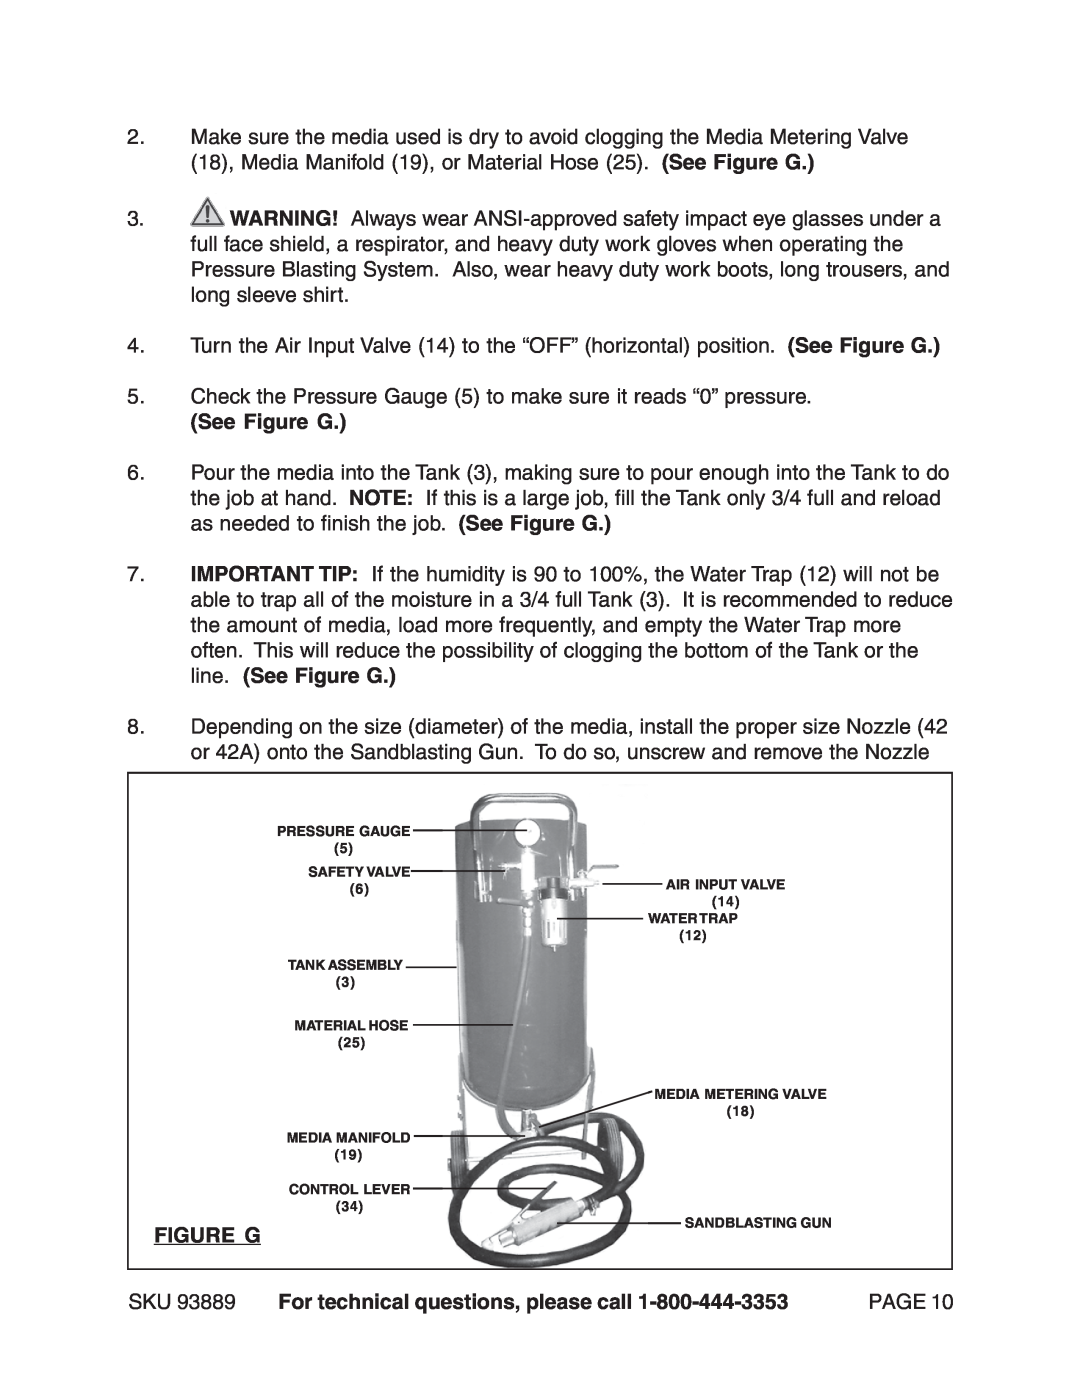 Harbor Freight Tools 93889 manual See Figure G, Check the Pressure Gauge 5 to make sure it reads “0” pressure 